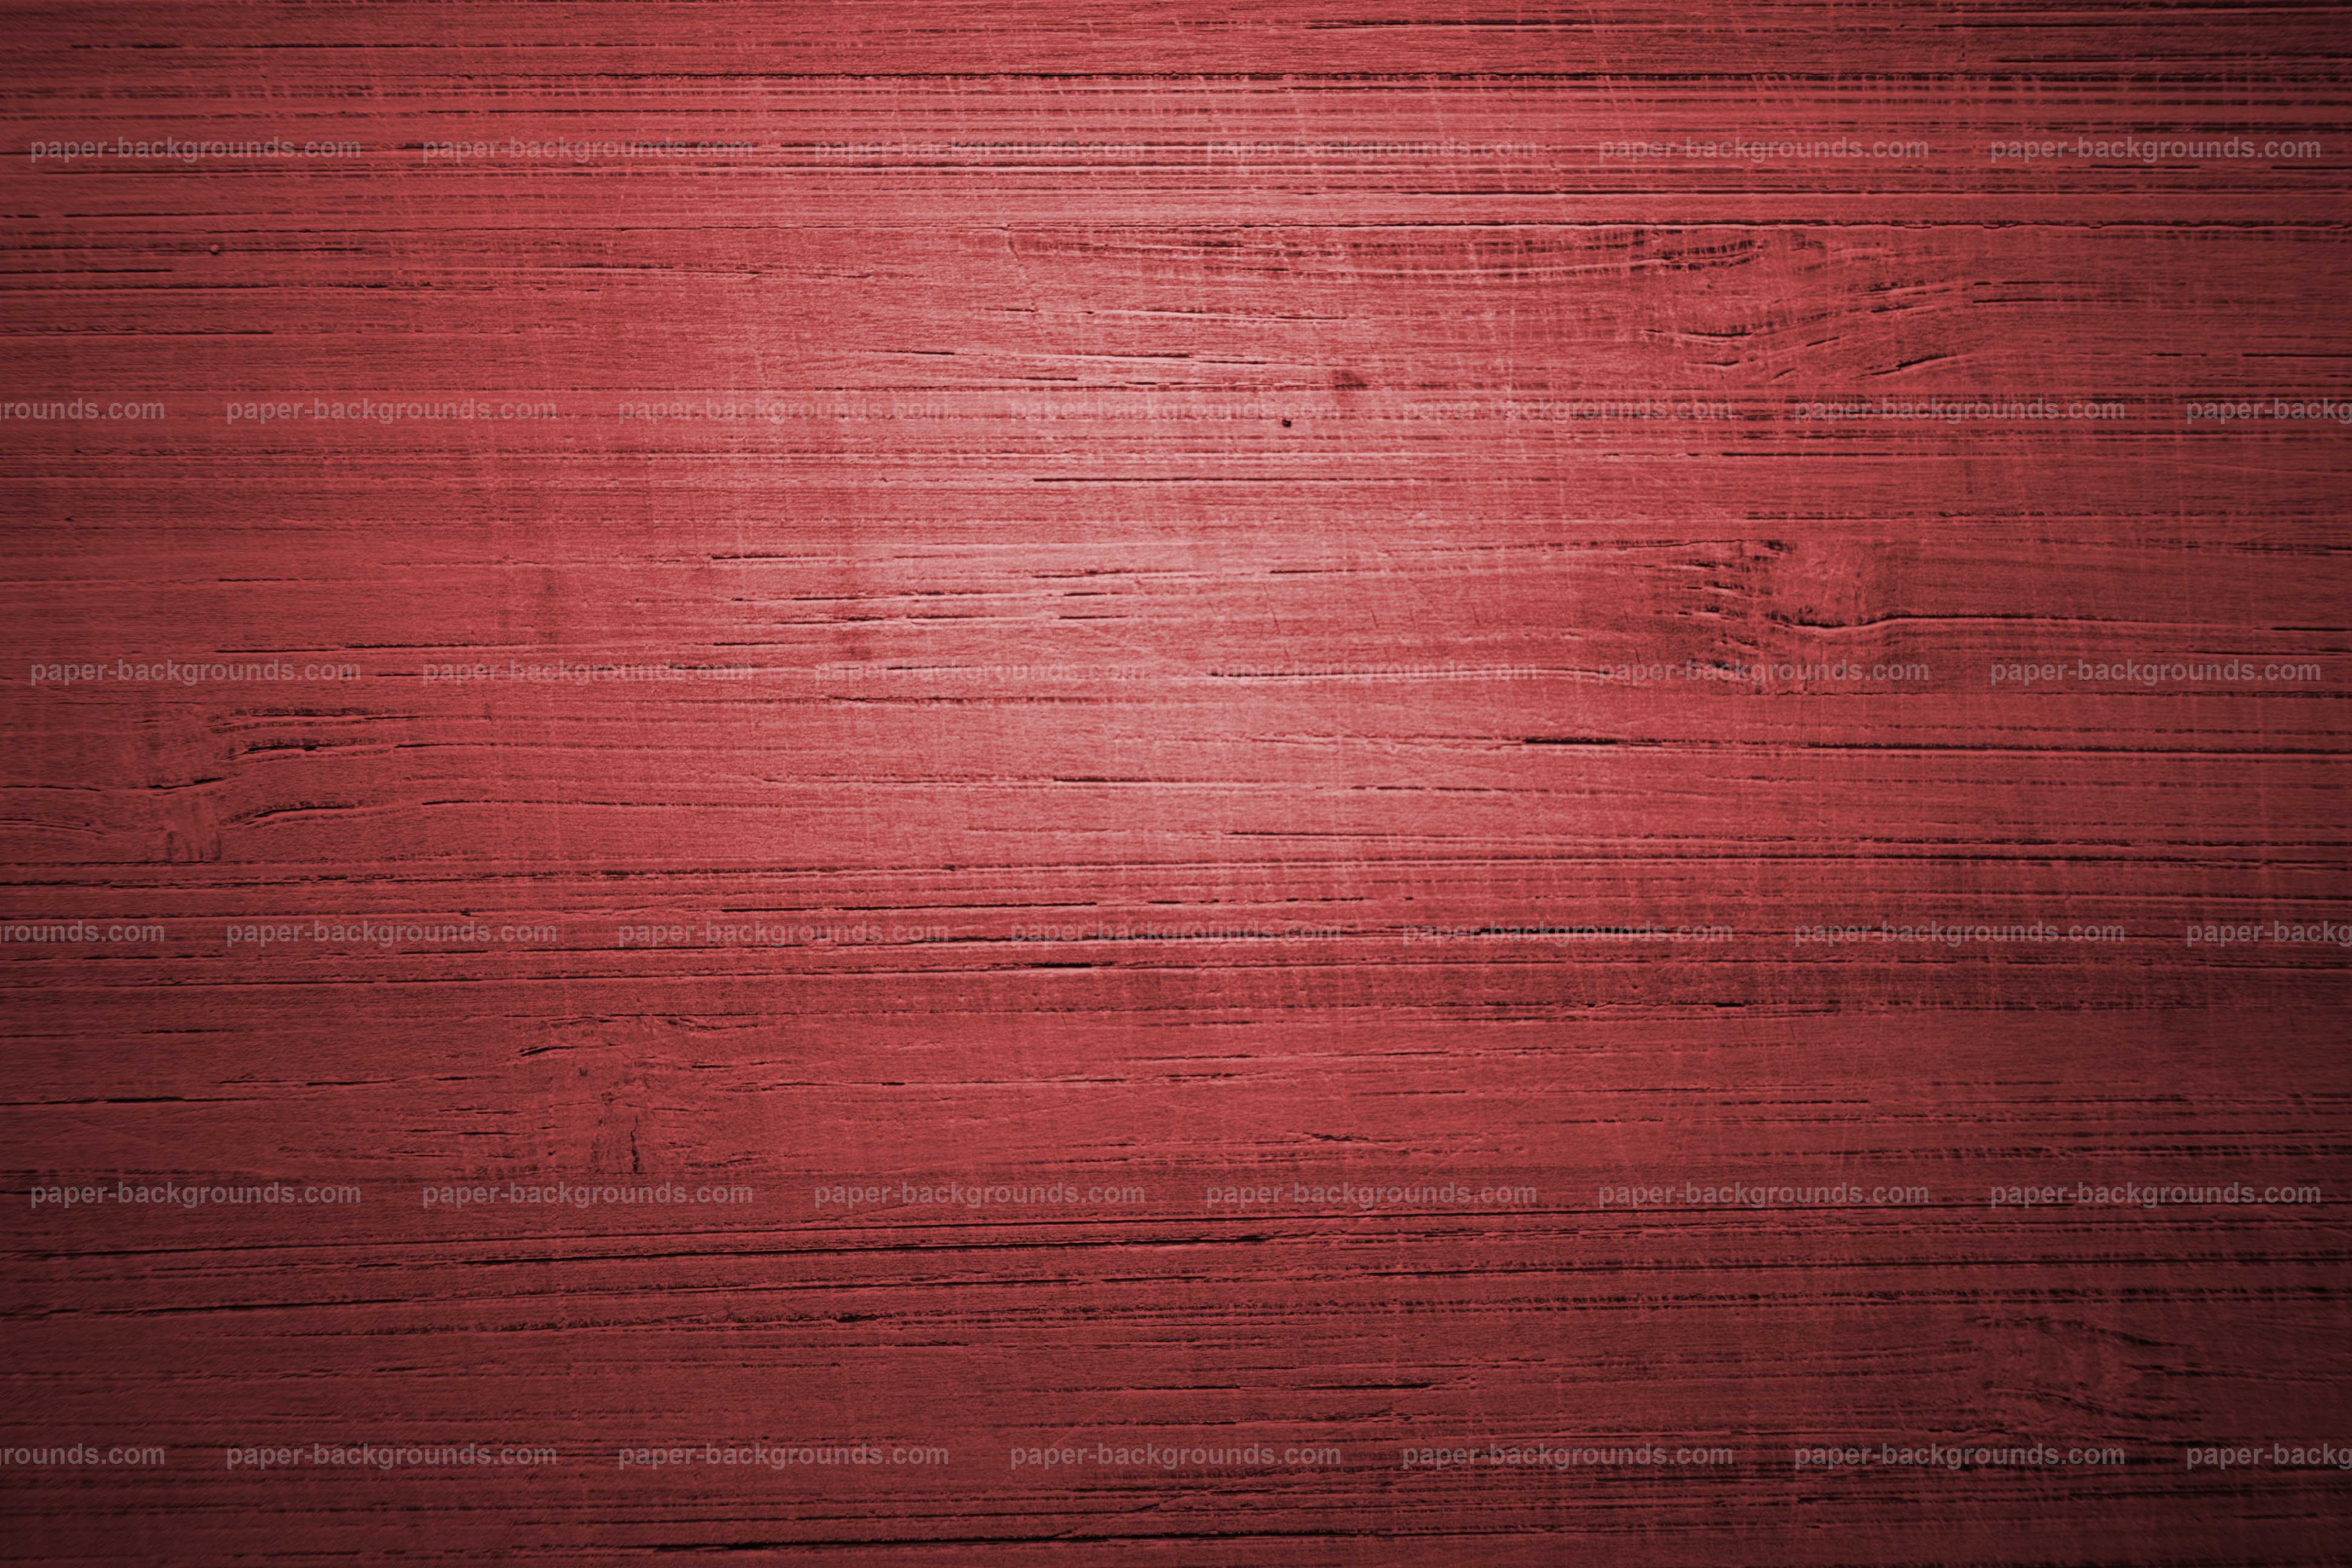 Paper Backgrounds | Red Wood Texture Background